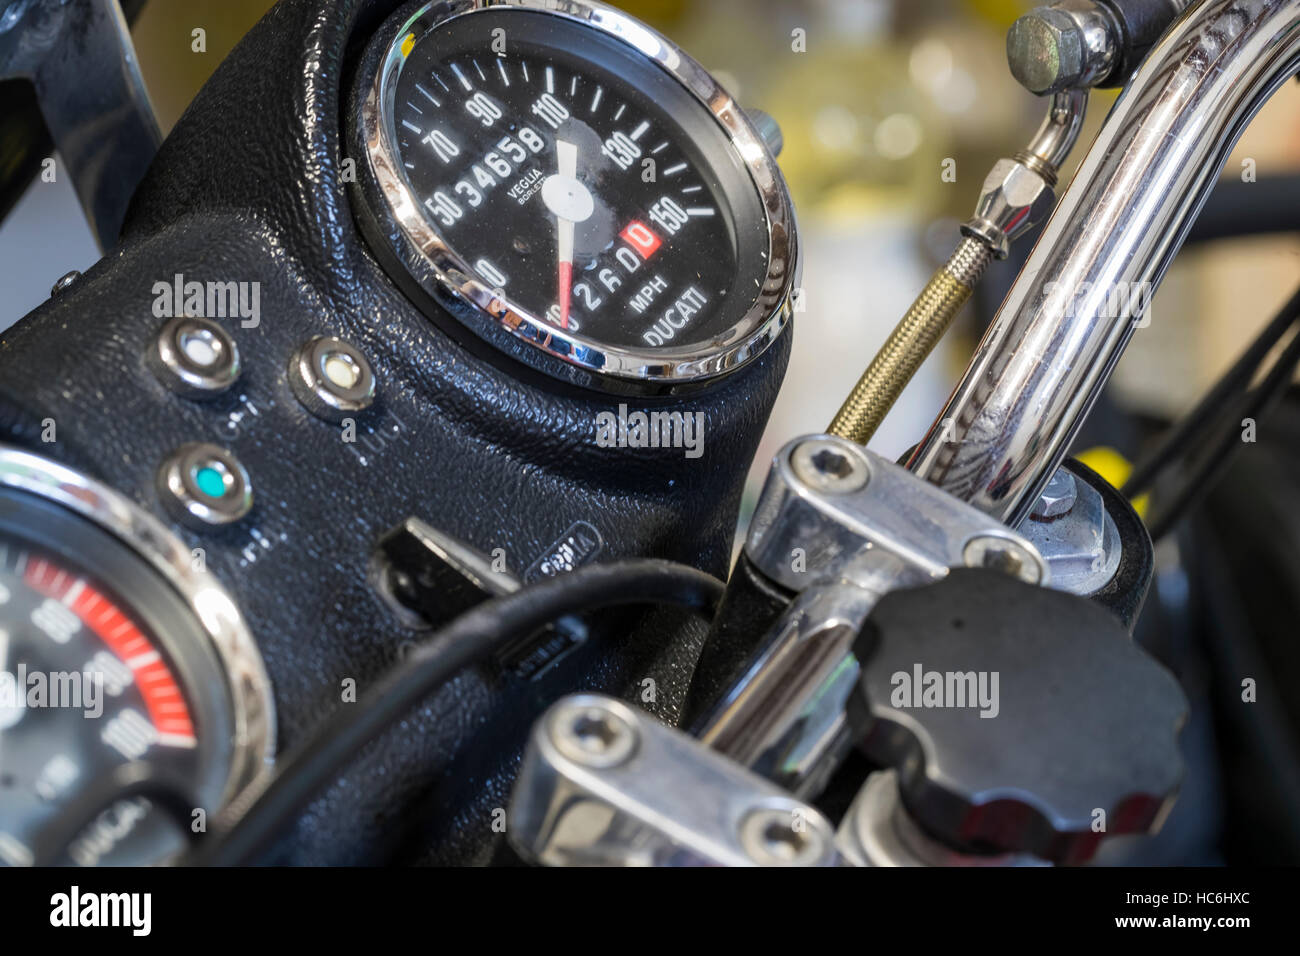 Small private collection of classic Ducati motorcycles, owned and ridden in Tuscany, Italy. Stock Photo